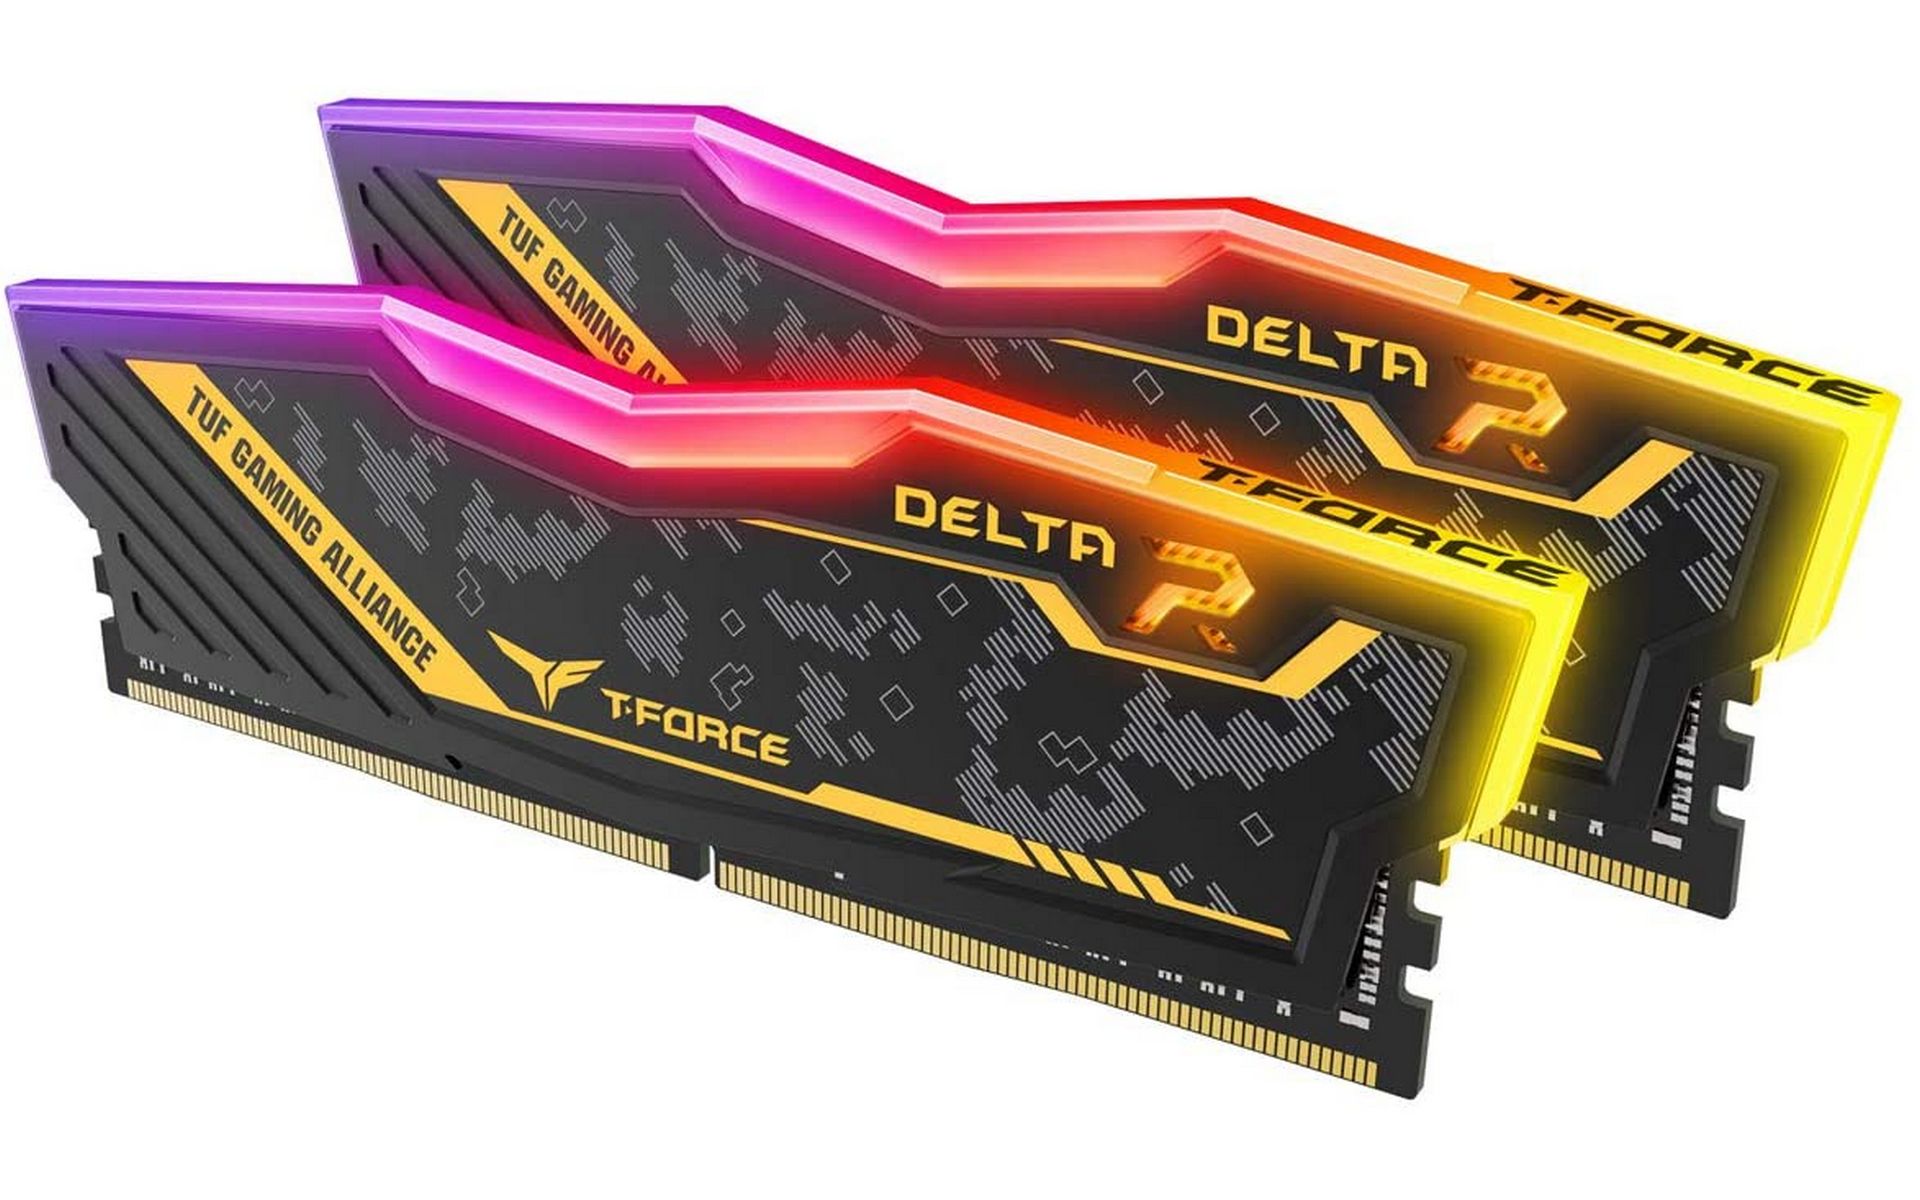 8gb team group t force delta. 8gb Team Group t-Force Delta RGB 3200mhz. Ram - t-Force Delta RGB ddr4 16gb. Team Group ddr4 16gb (2x8gb) 3200mhz PC-25600 Delta r TUF Yellow. TEAMGROUP T-Force Delta RGB ddr4 32gb (2x16gb) 3200mhz (Black/White).